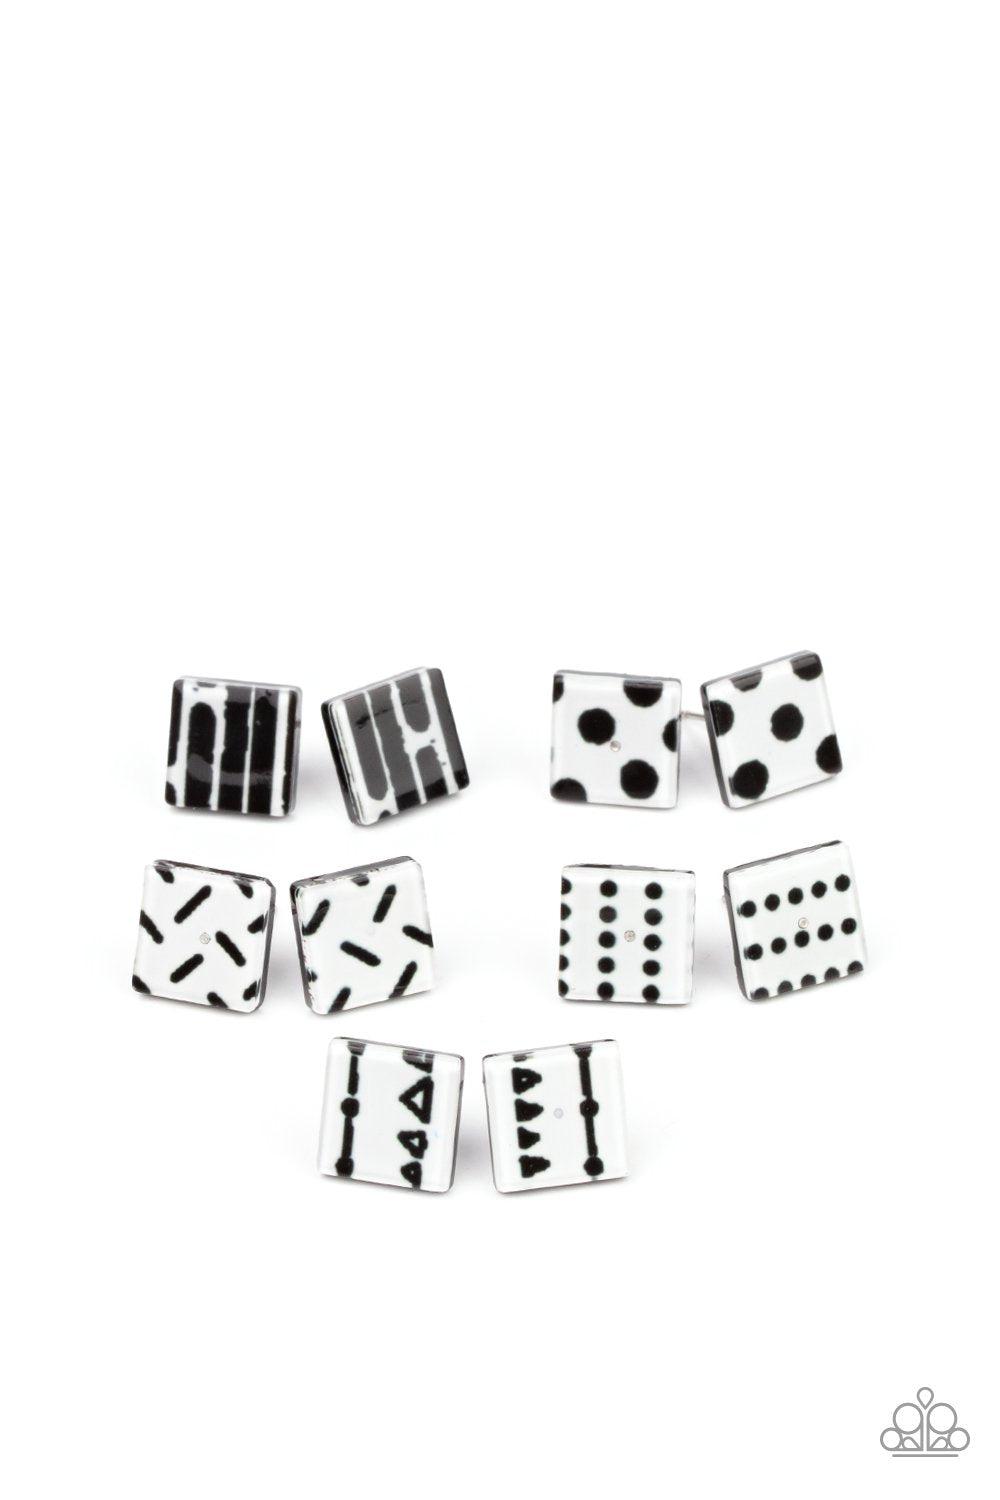 Starlet Shimmer Children's Black and White Post Earrings - Paparazzi Accessories (set of 5 pairs) - Full set -CarasShop.com - $5 Jewelry by Cara Jewels